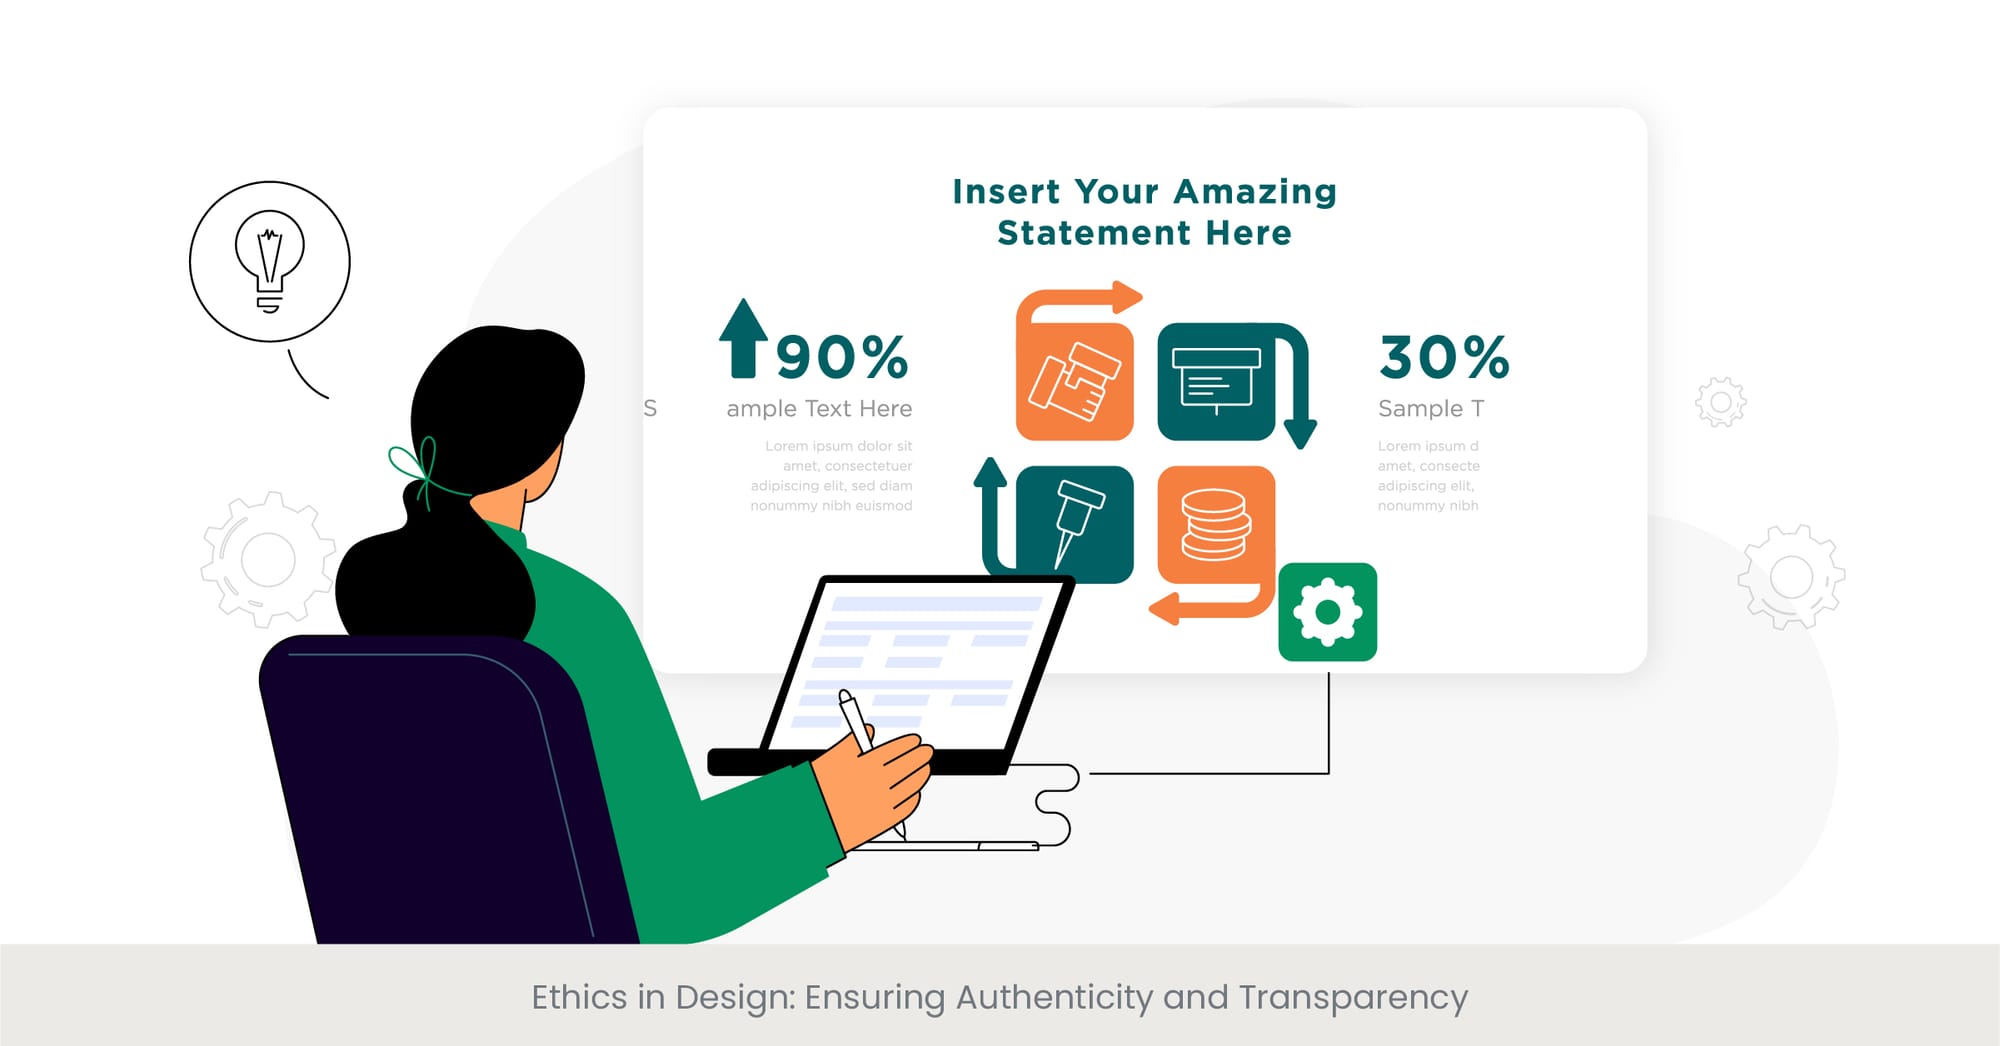 Ethics in Design: Ensuring Authenticity and Transparency